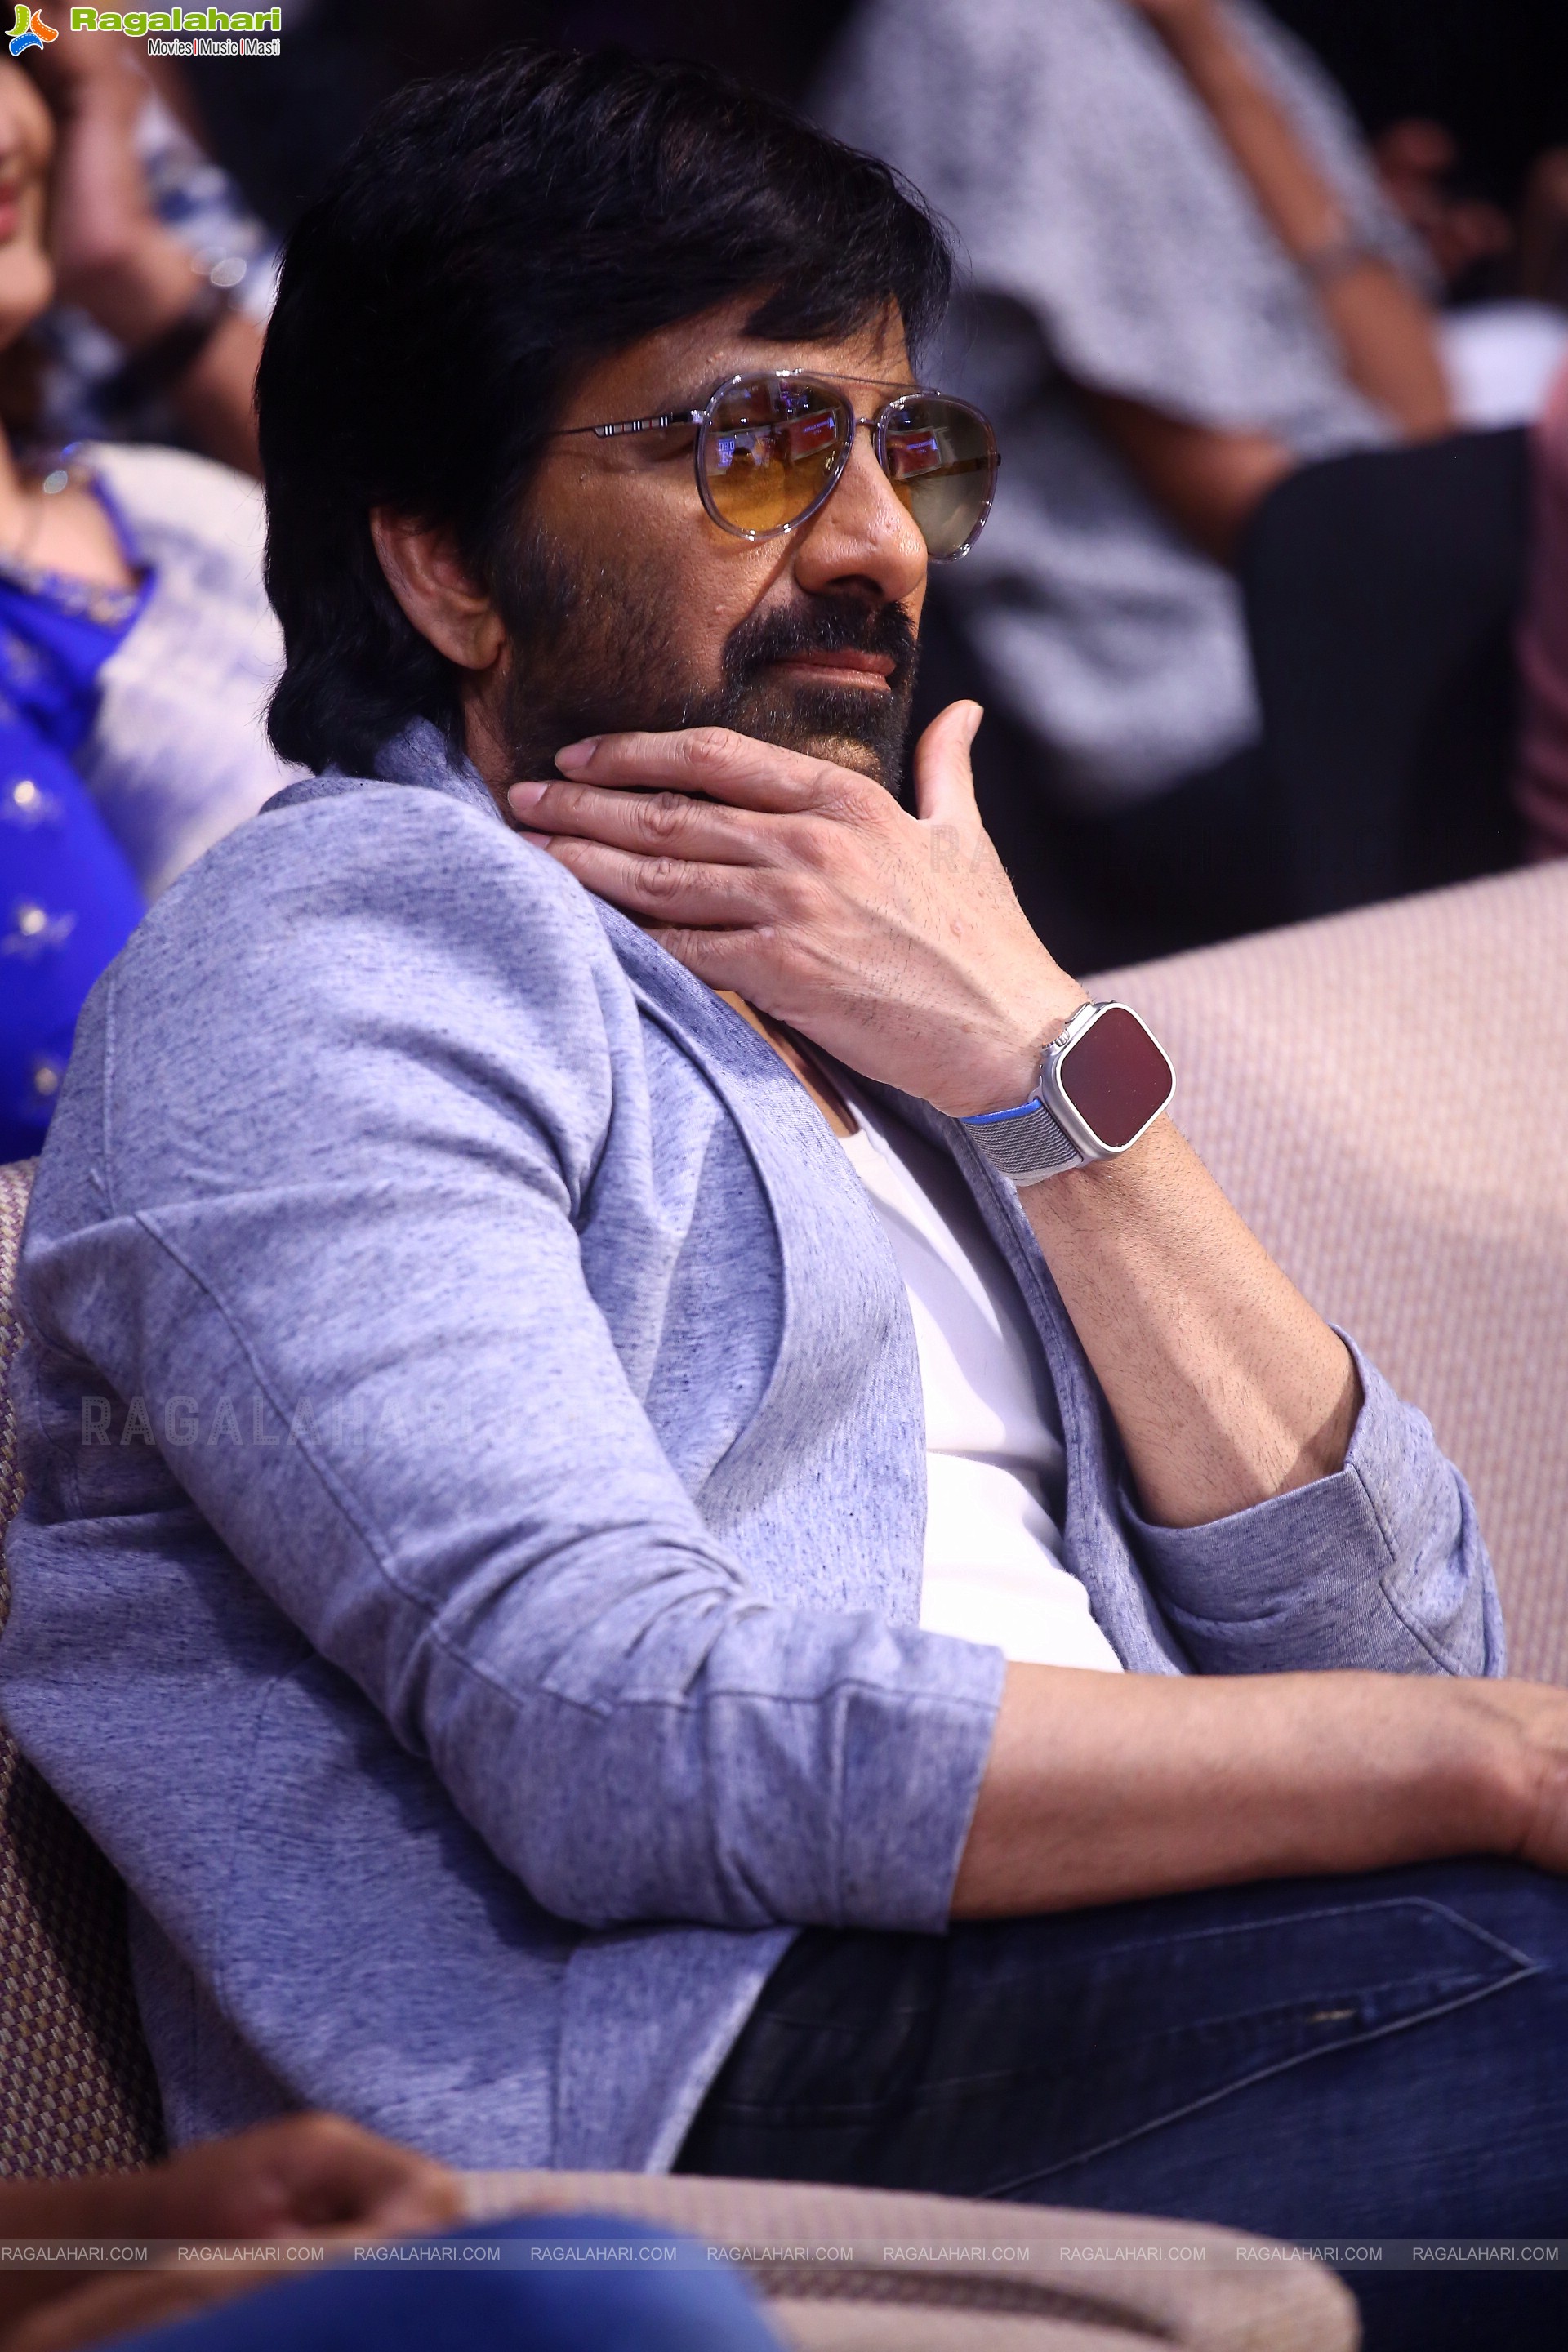 Ravi Teja at Dhamaka Movie Pre-Release Event, HD Photo Gallery